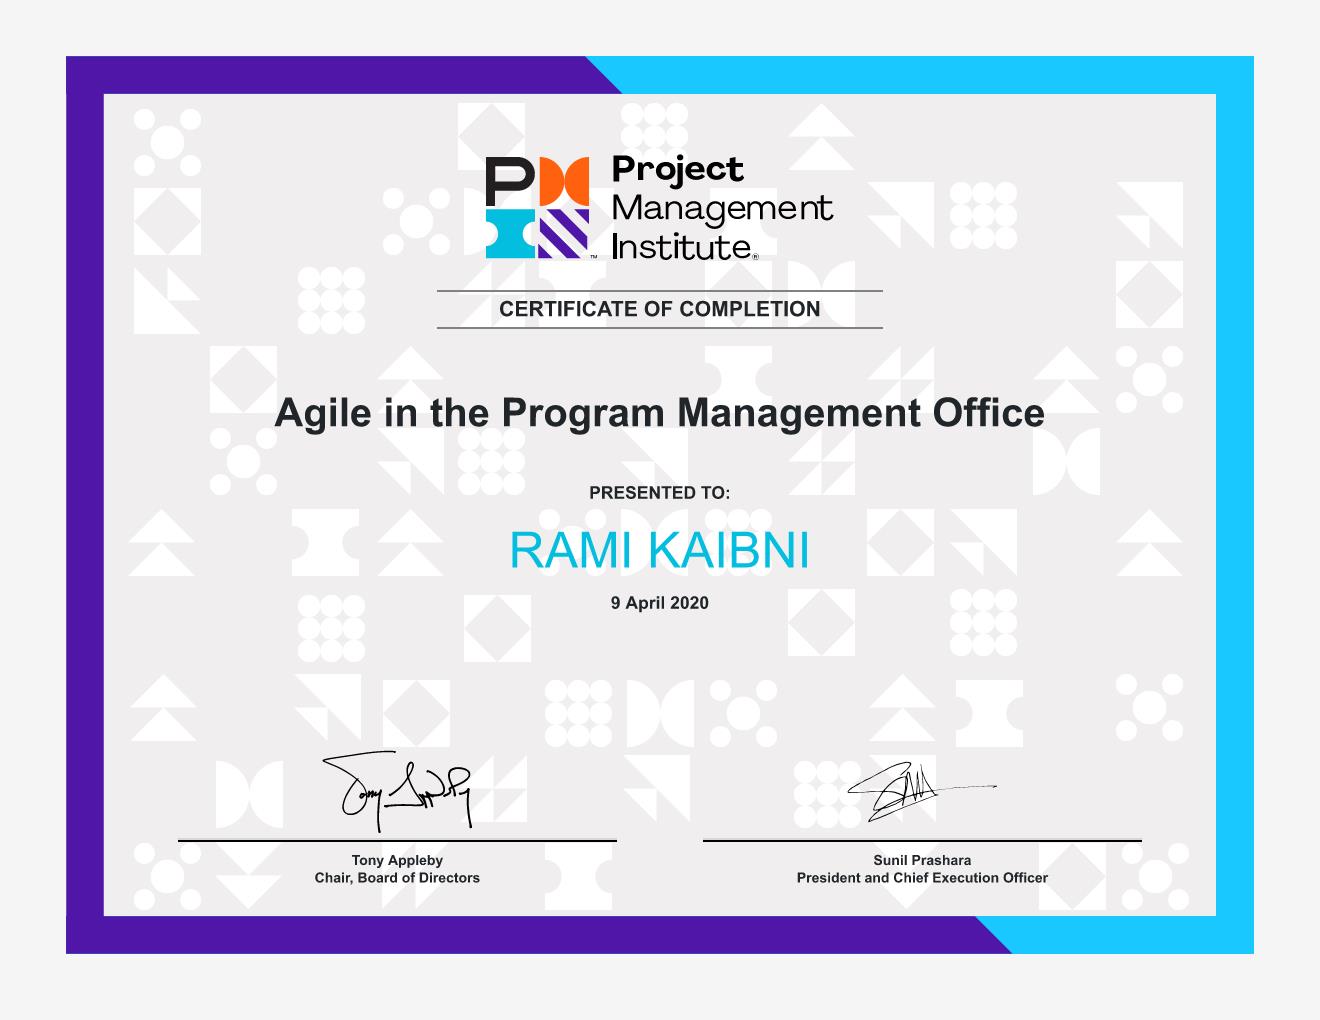 Agile in the Program Management Office